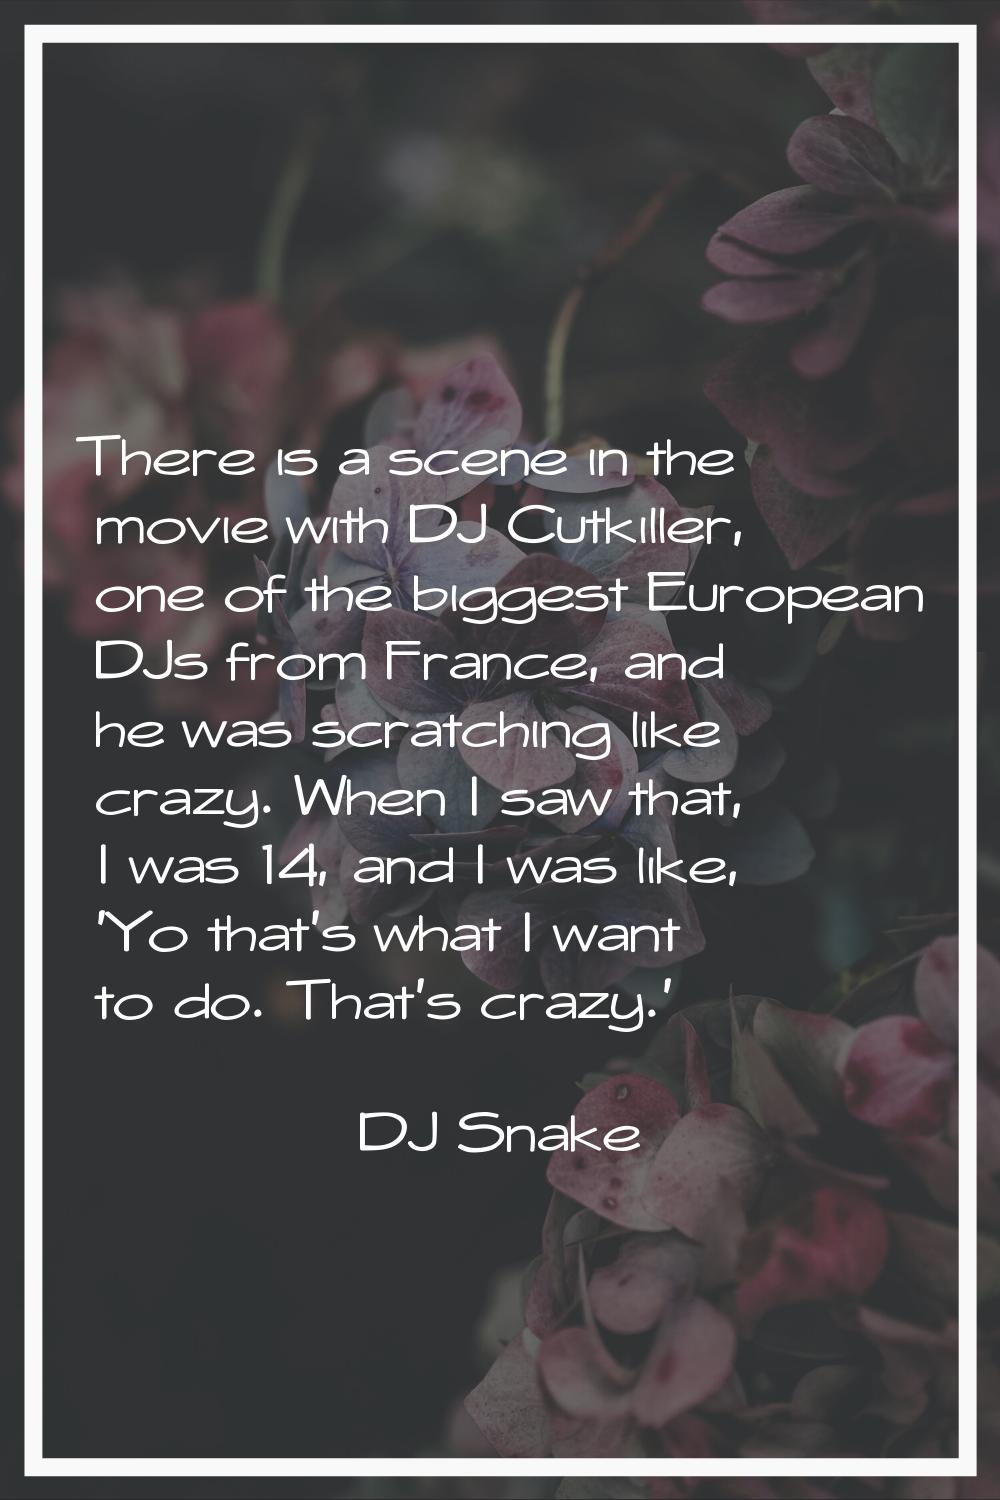 There is a scene in the movie with DJ Cutkiller, one of the biggest European DJs from France, and h